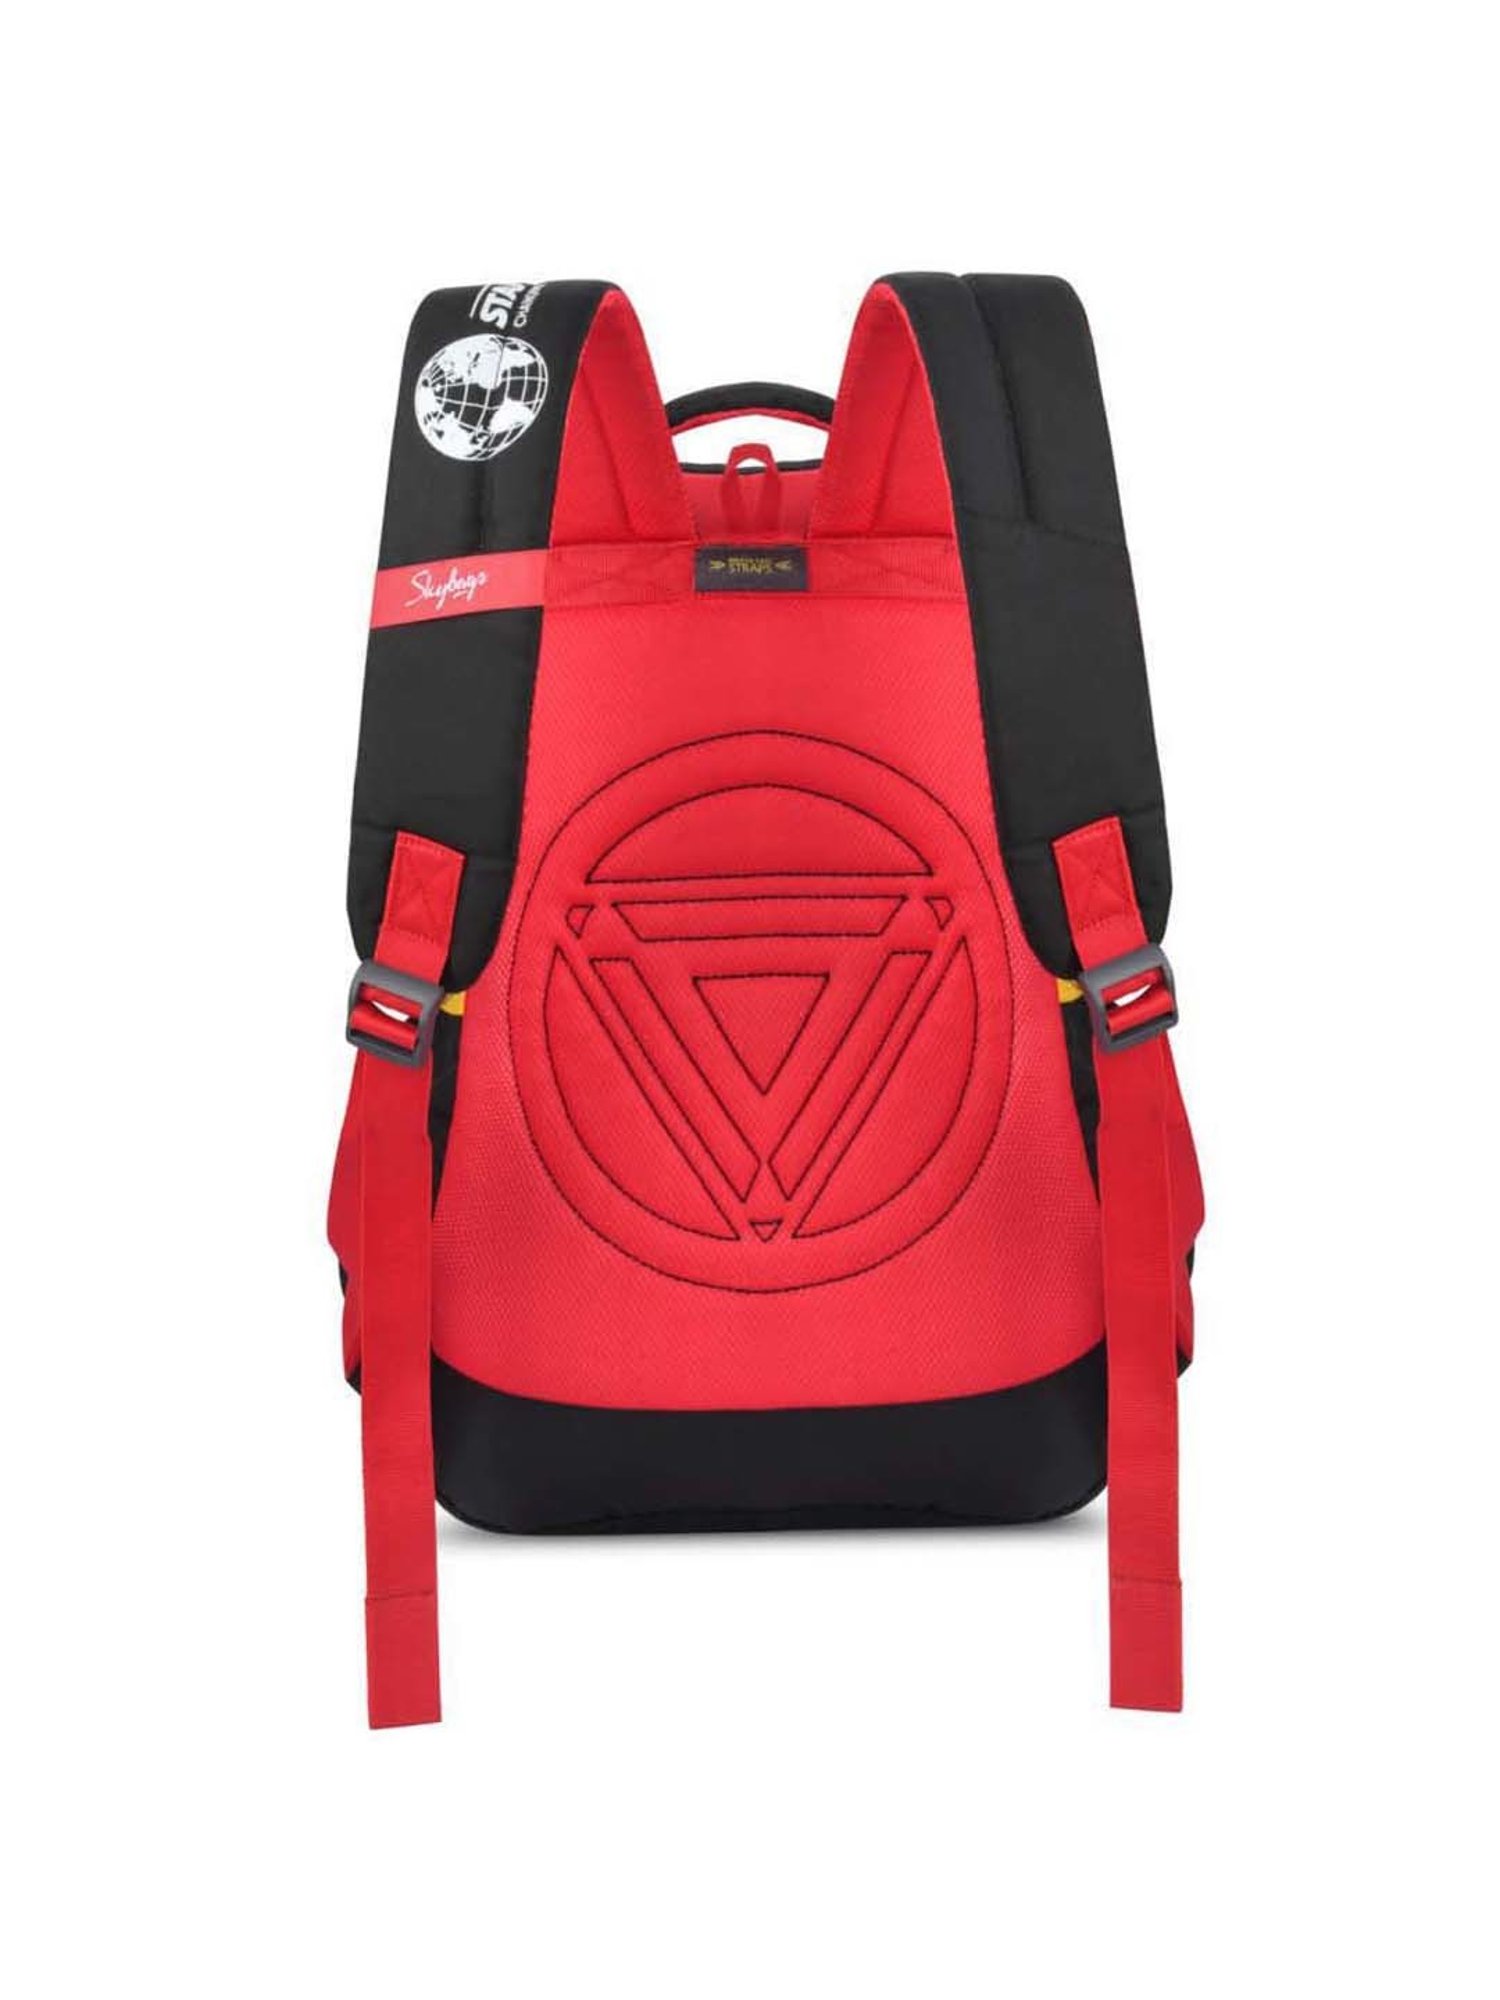 Iron Man 3 School Bag, Gifts for Kids